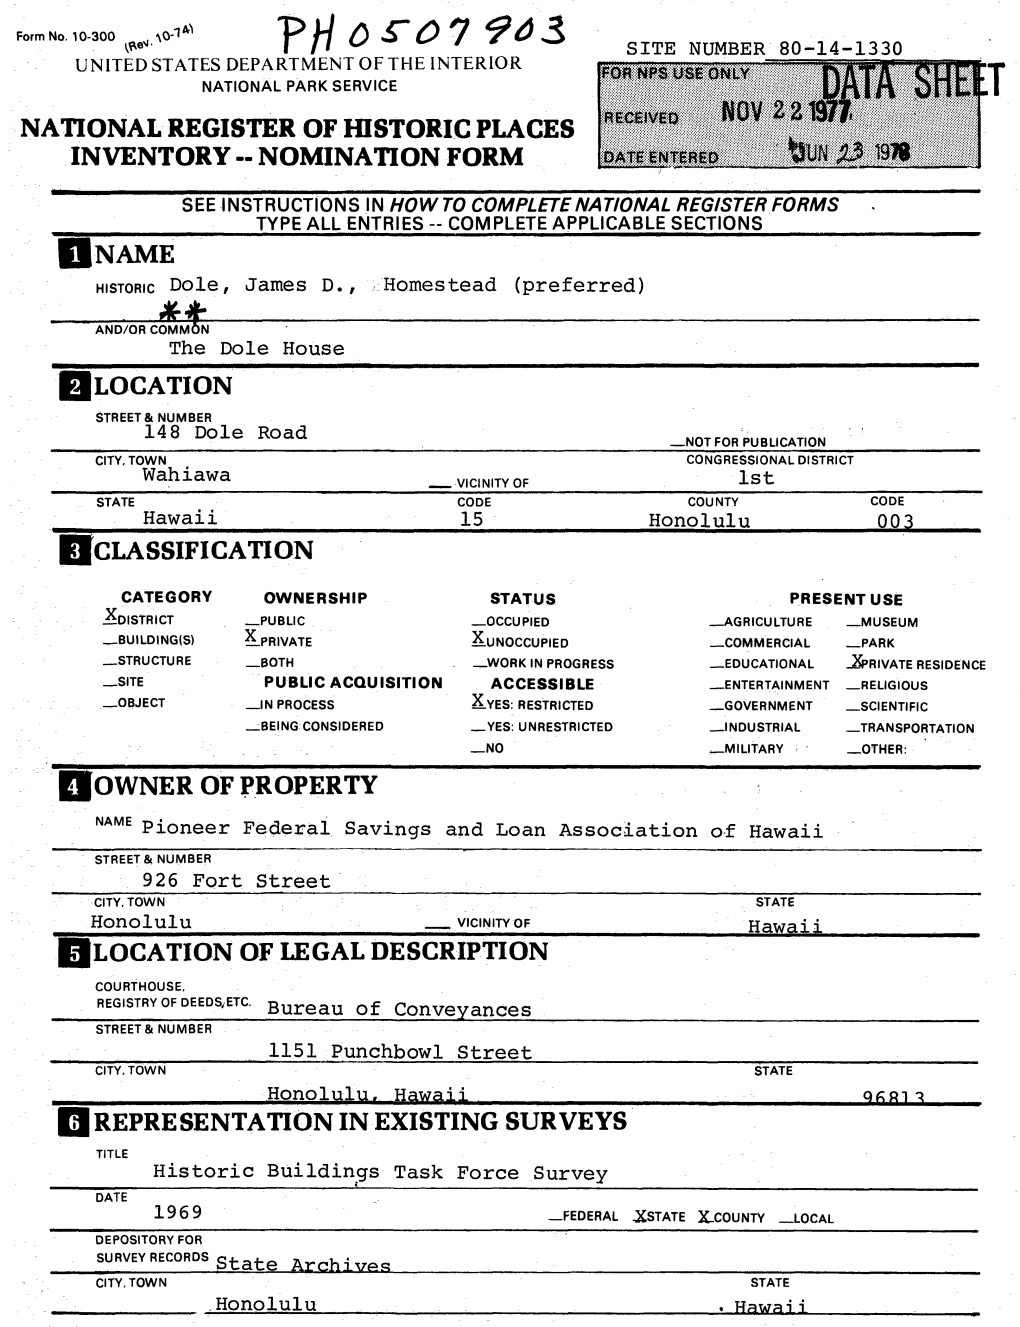 National Register of Historic Places Inventory--Nomination Form [Owner of Property